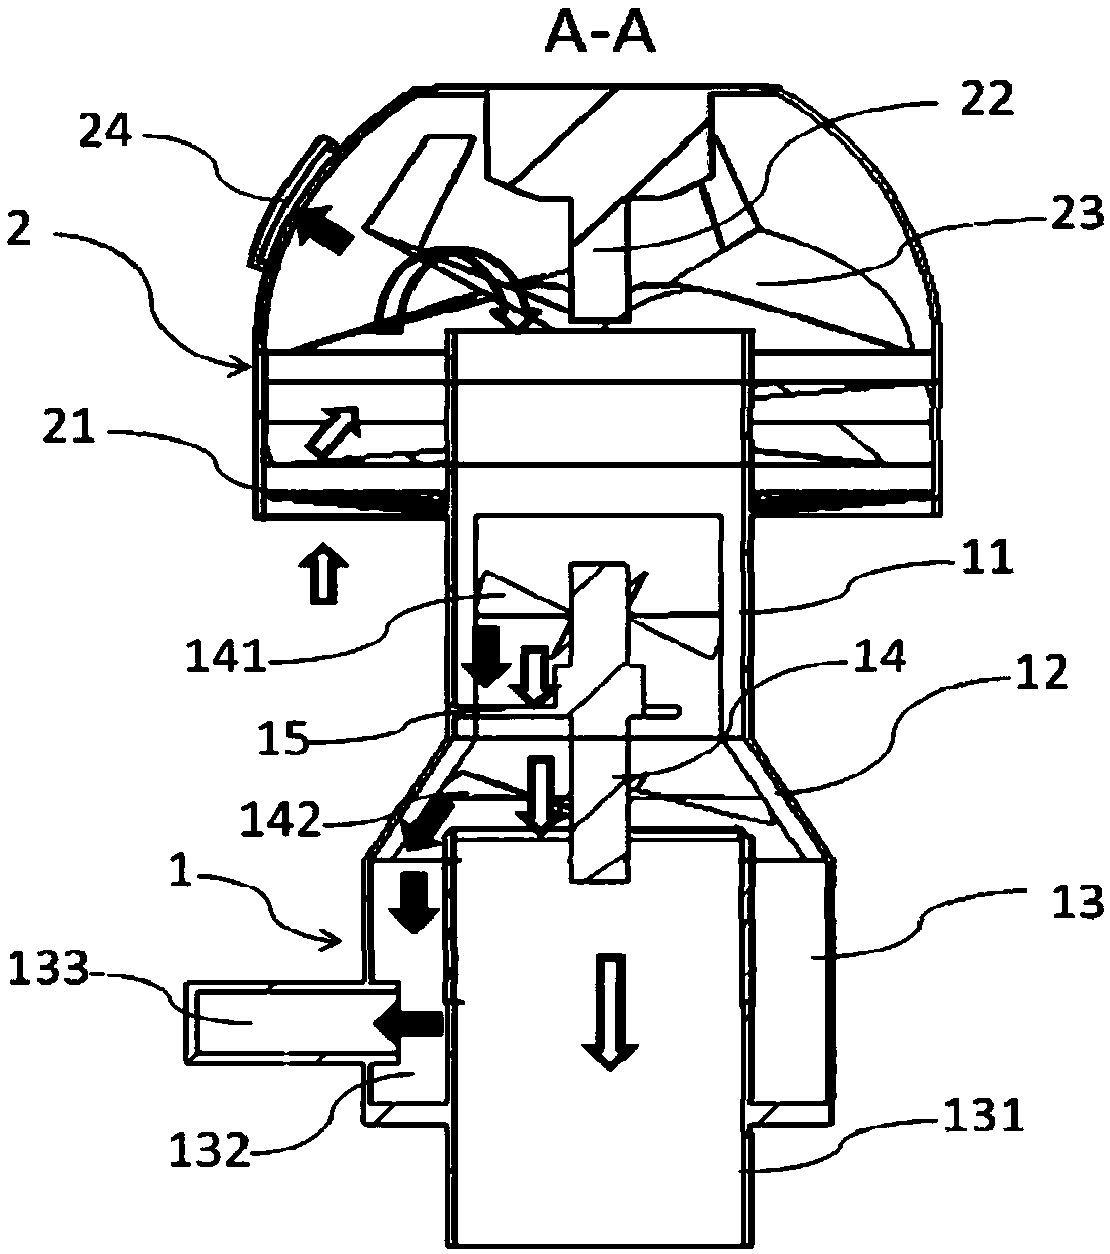 Air Pre-filter and Air Filtration System for Engine